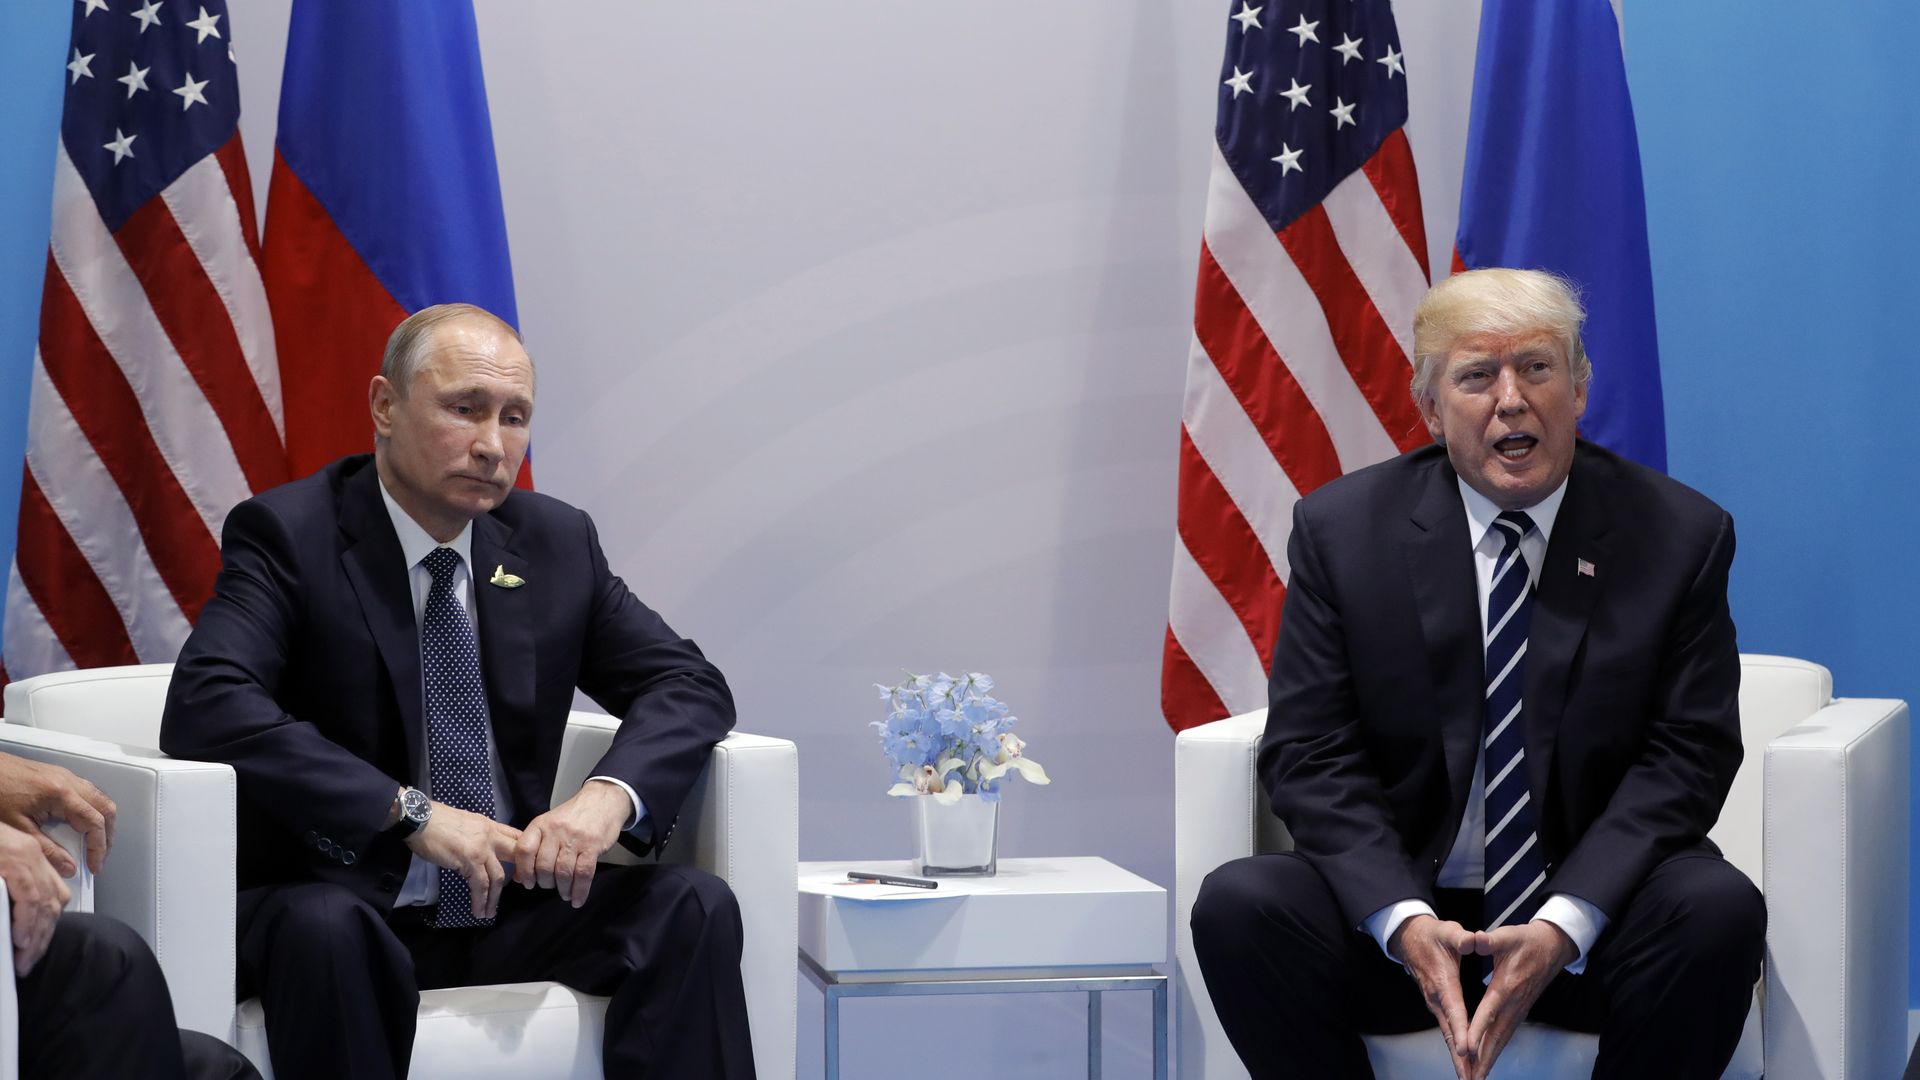 Trump and Putin sit across from one another during a bilateral meeting in Germany last year